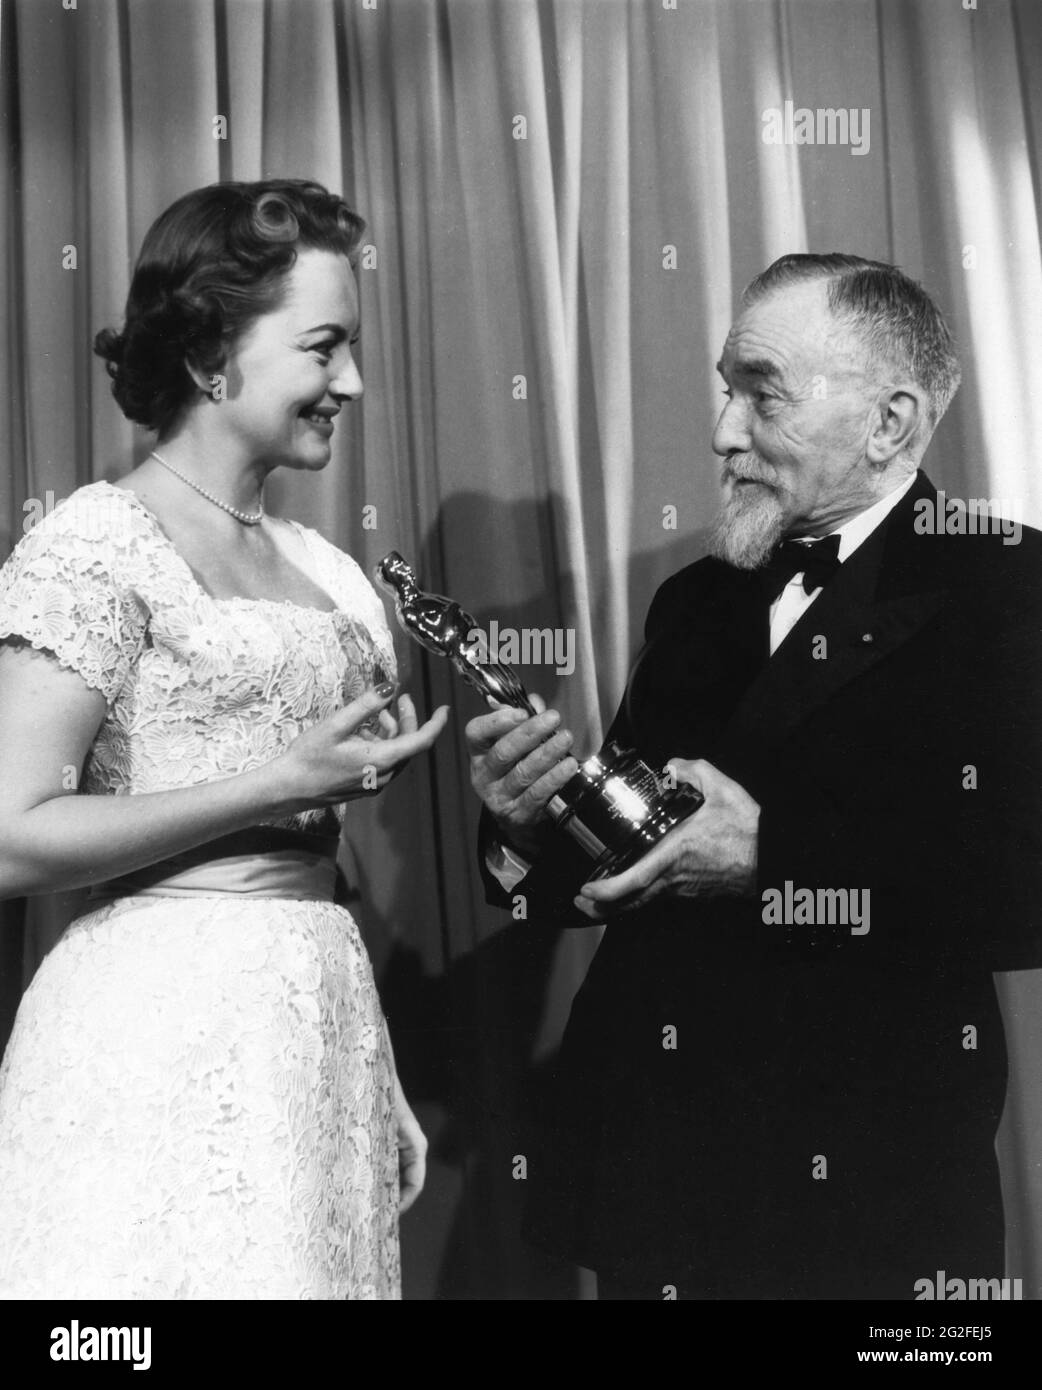 OLIVIA de HAVILLAND presents French Professor HENRI CHRETIEN with his Oscar / Academy Award of Merit for his invention of the Anamorphic Lens used in the CinemaScope Process circa 25th March 1954 at the Cannes Film Festival which began at the same time as the 1954 26th Academy Awards Ceremony in Los Angeles publicity for Twentieth Century Fox Stock Photo